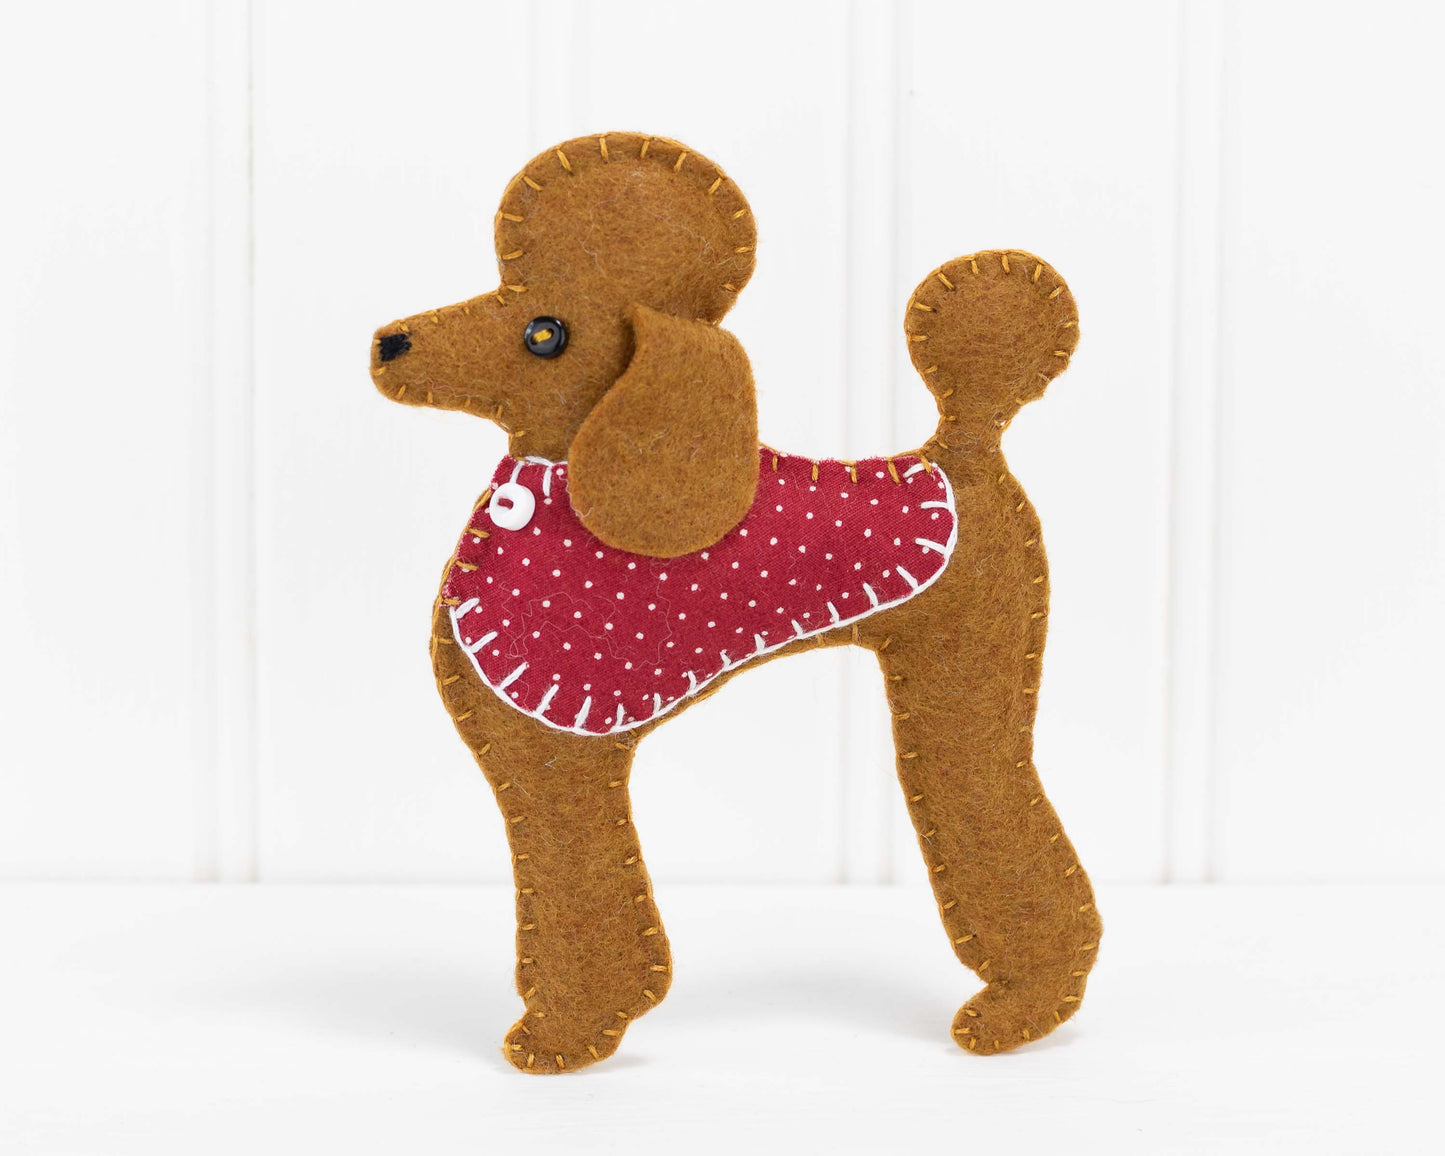 Pepe the Poodle Felt Ornament Sewing Pattern